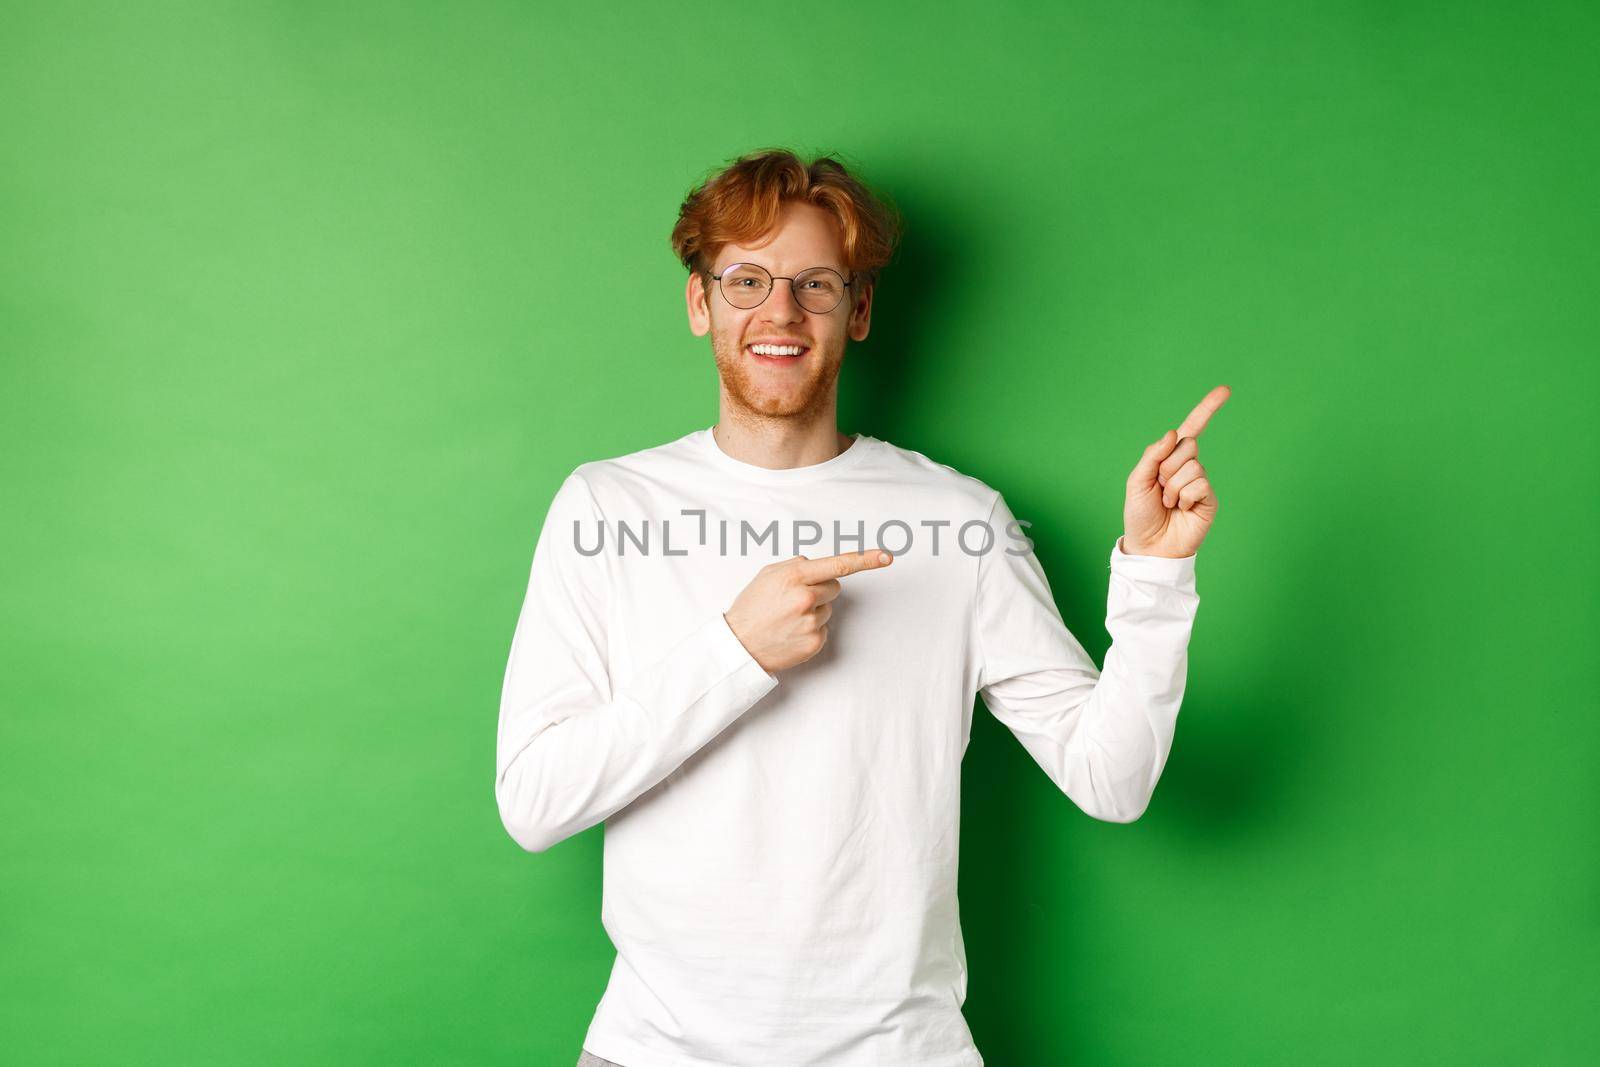 Handsome young man with ginger hair and glasses, pointing fingers right at copy space and smiling, standing over green background.